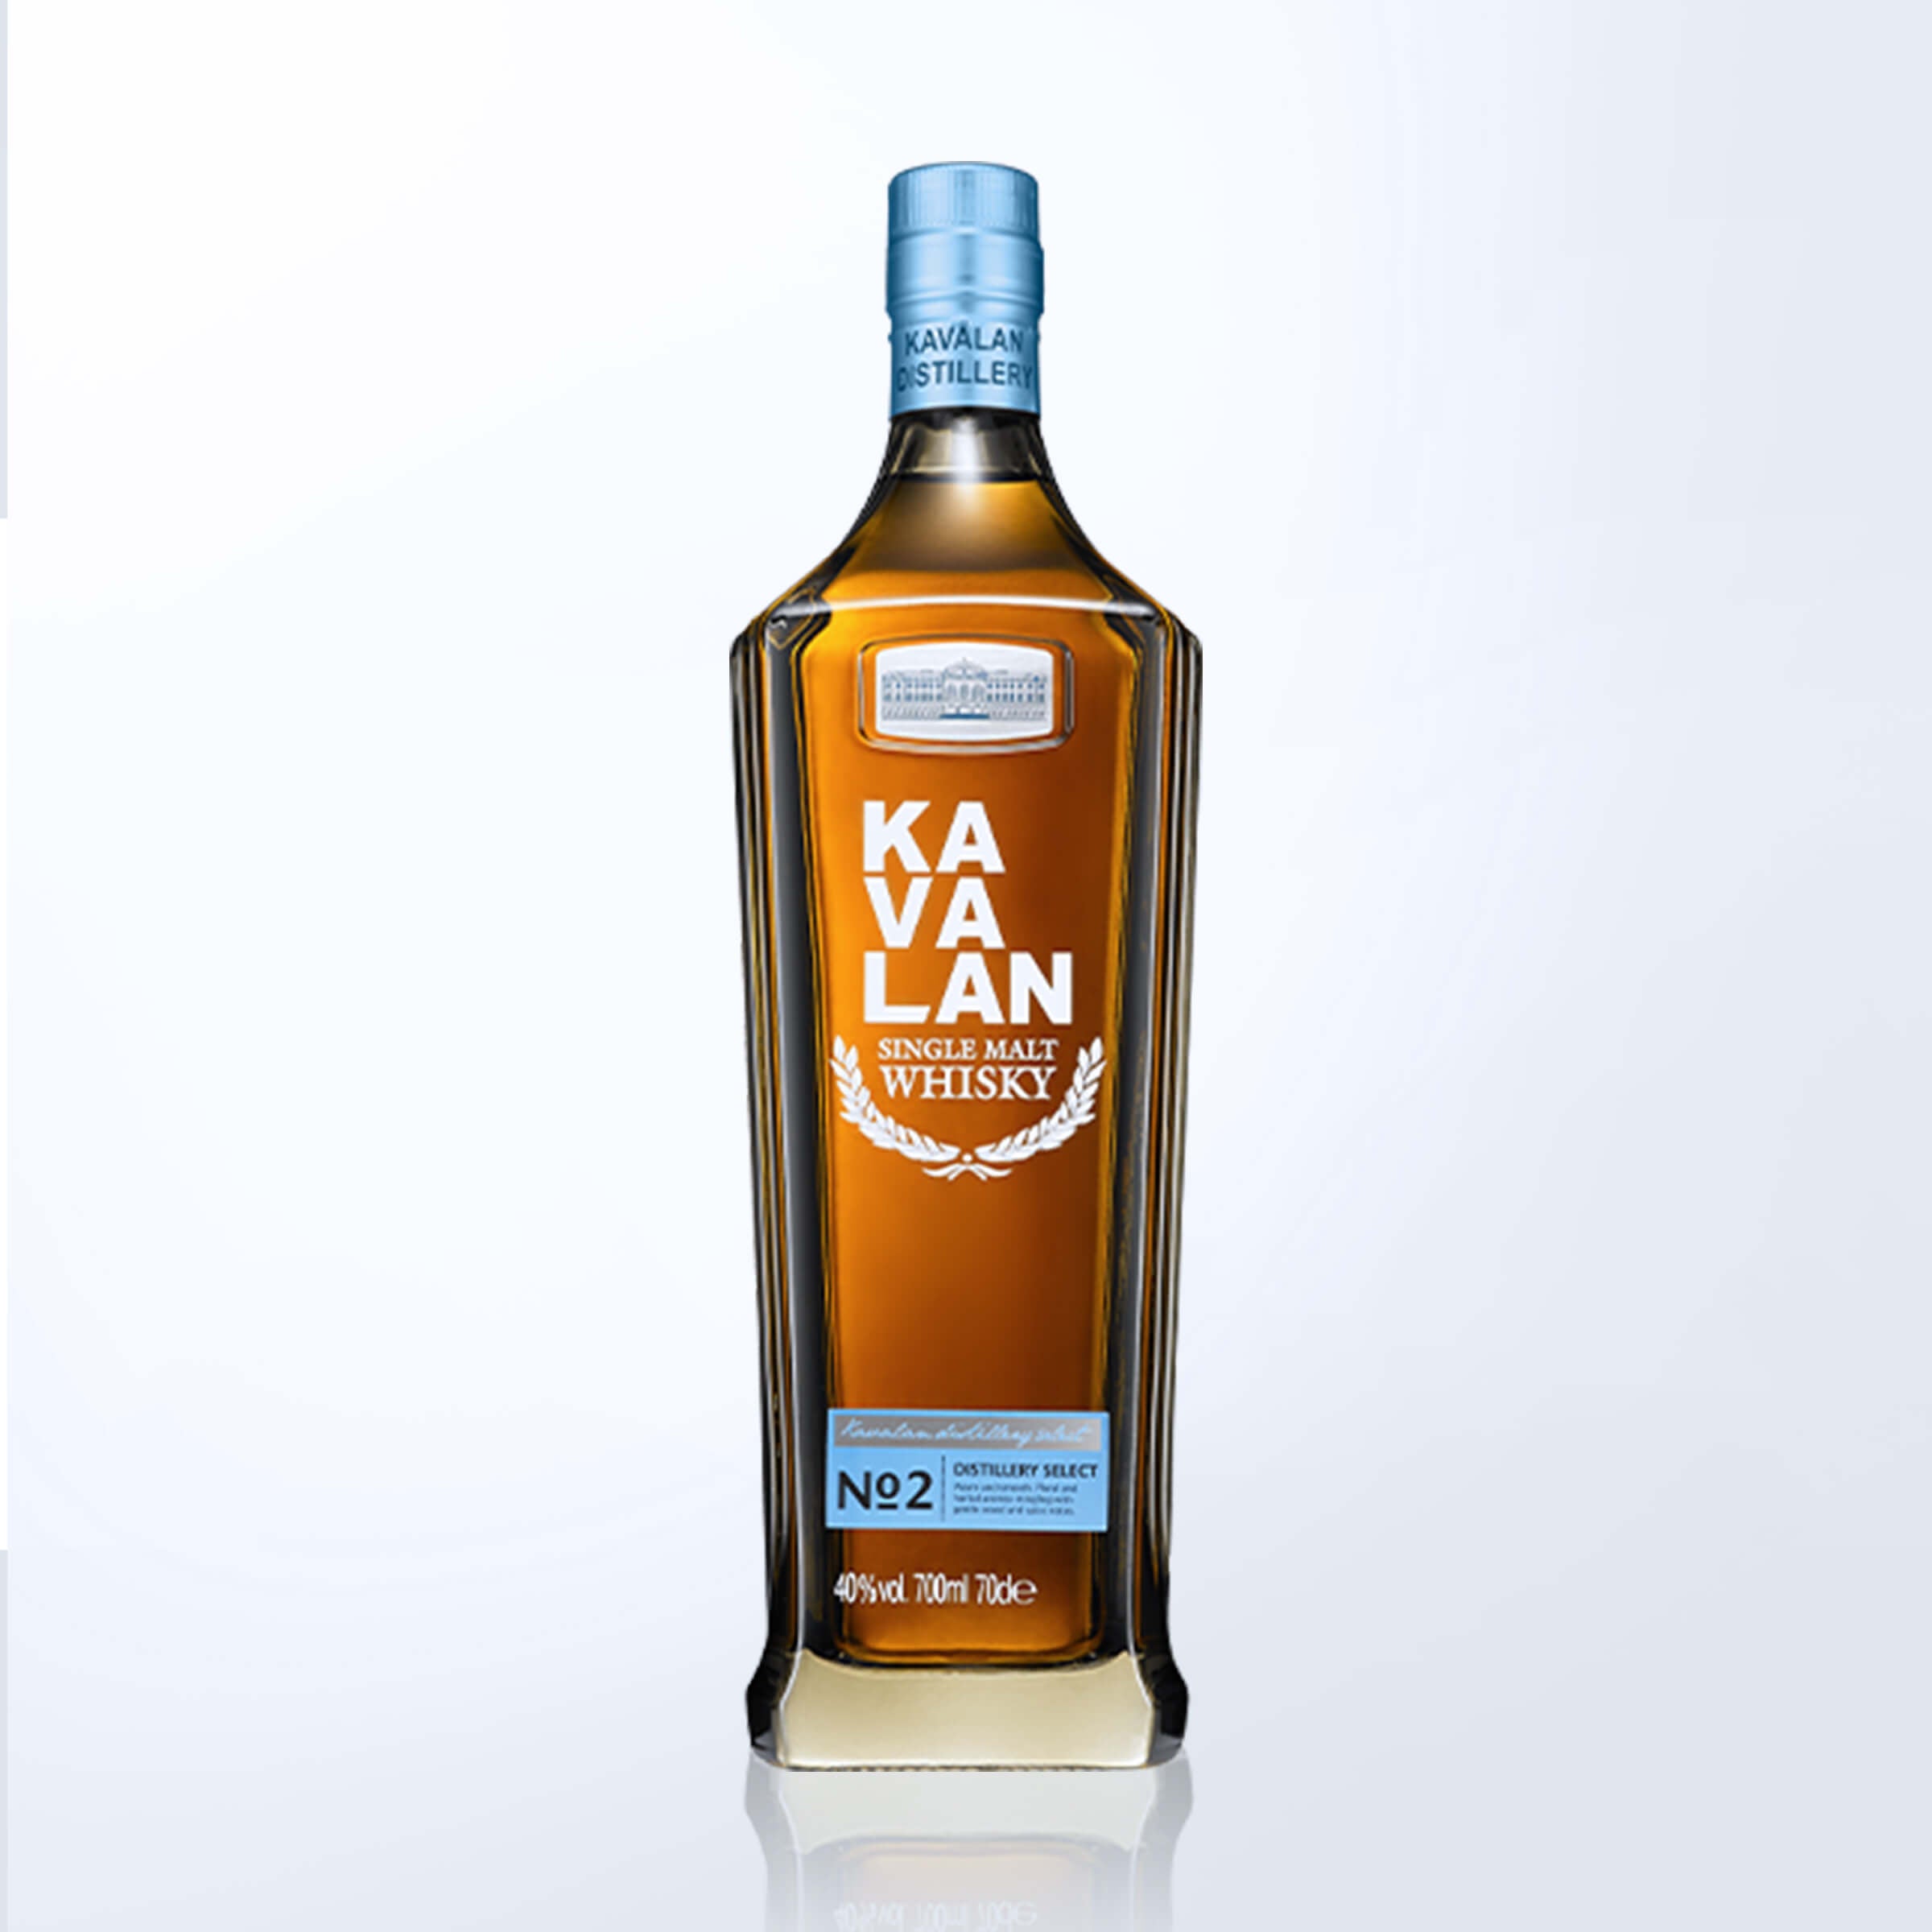 Kavalan Distillery Select No. 2 Single Malt Whisky with Engraving |噶瑪蘭珍選No. 2單一麥芽威士忌含文字雕刻) - Design Your Own Wine